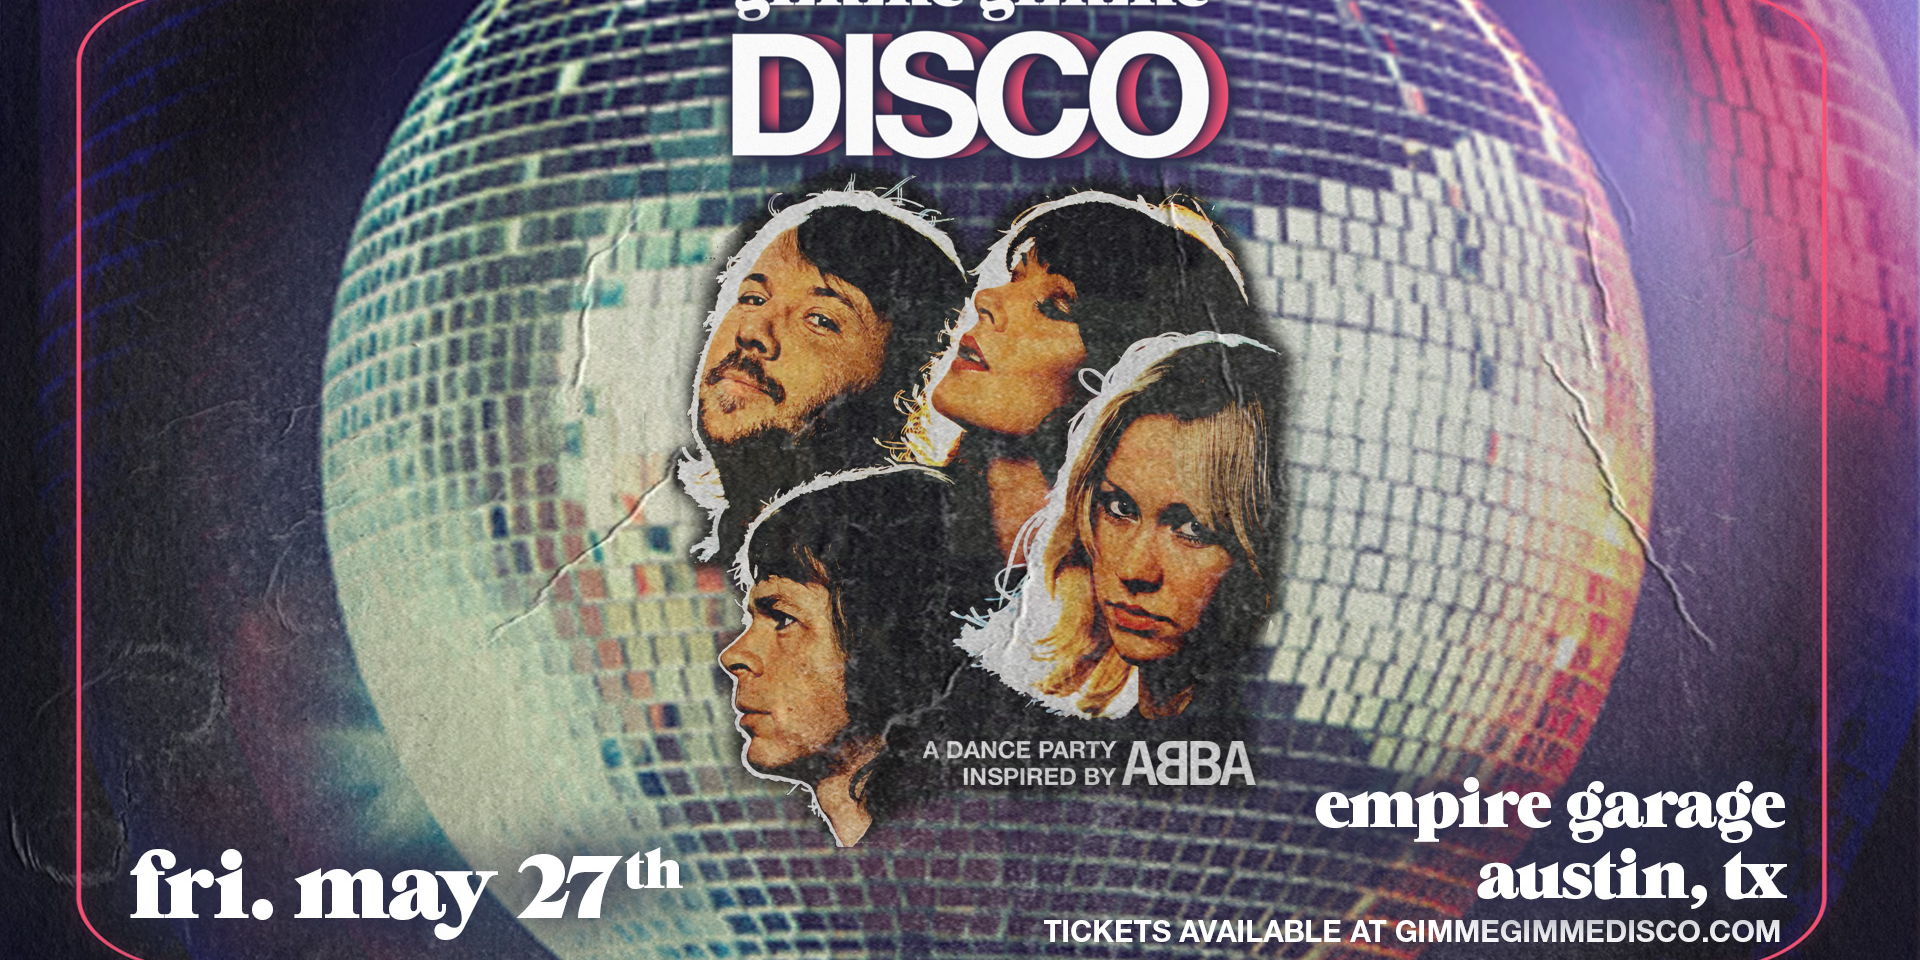 Gimme Gimme Disco: ABBA inspired dance party at Empire Garage 5/27 promotional image